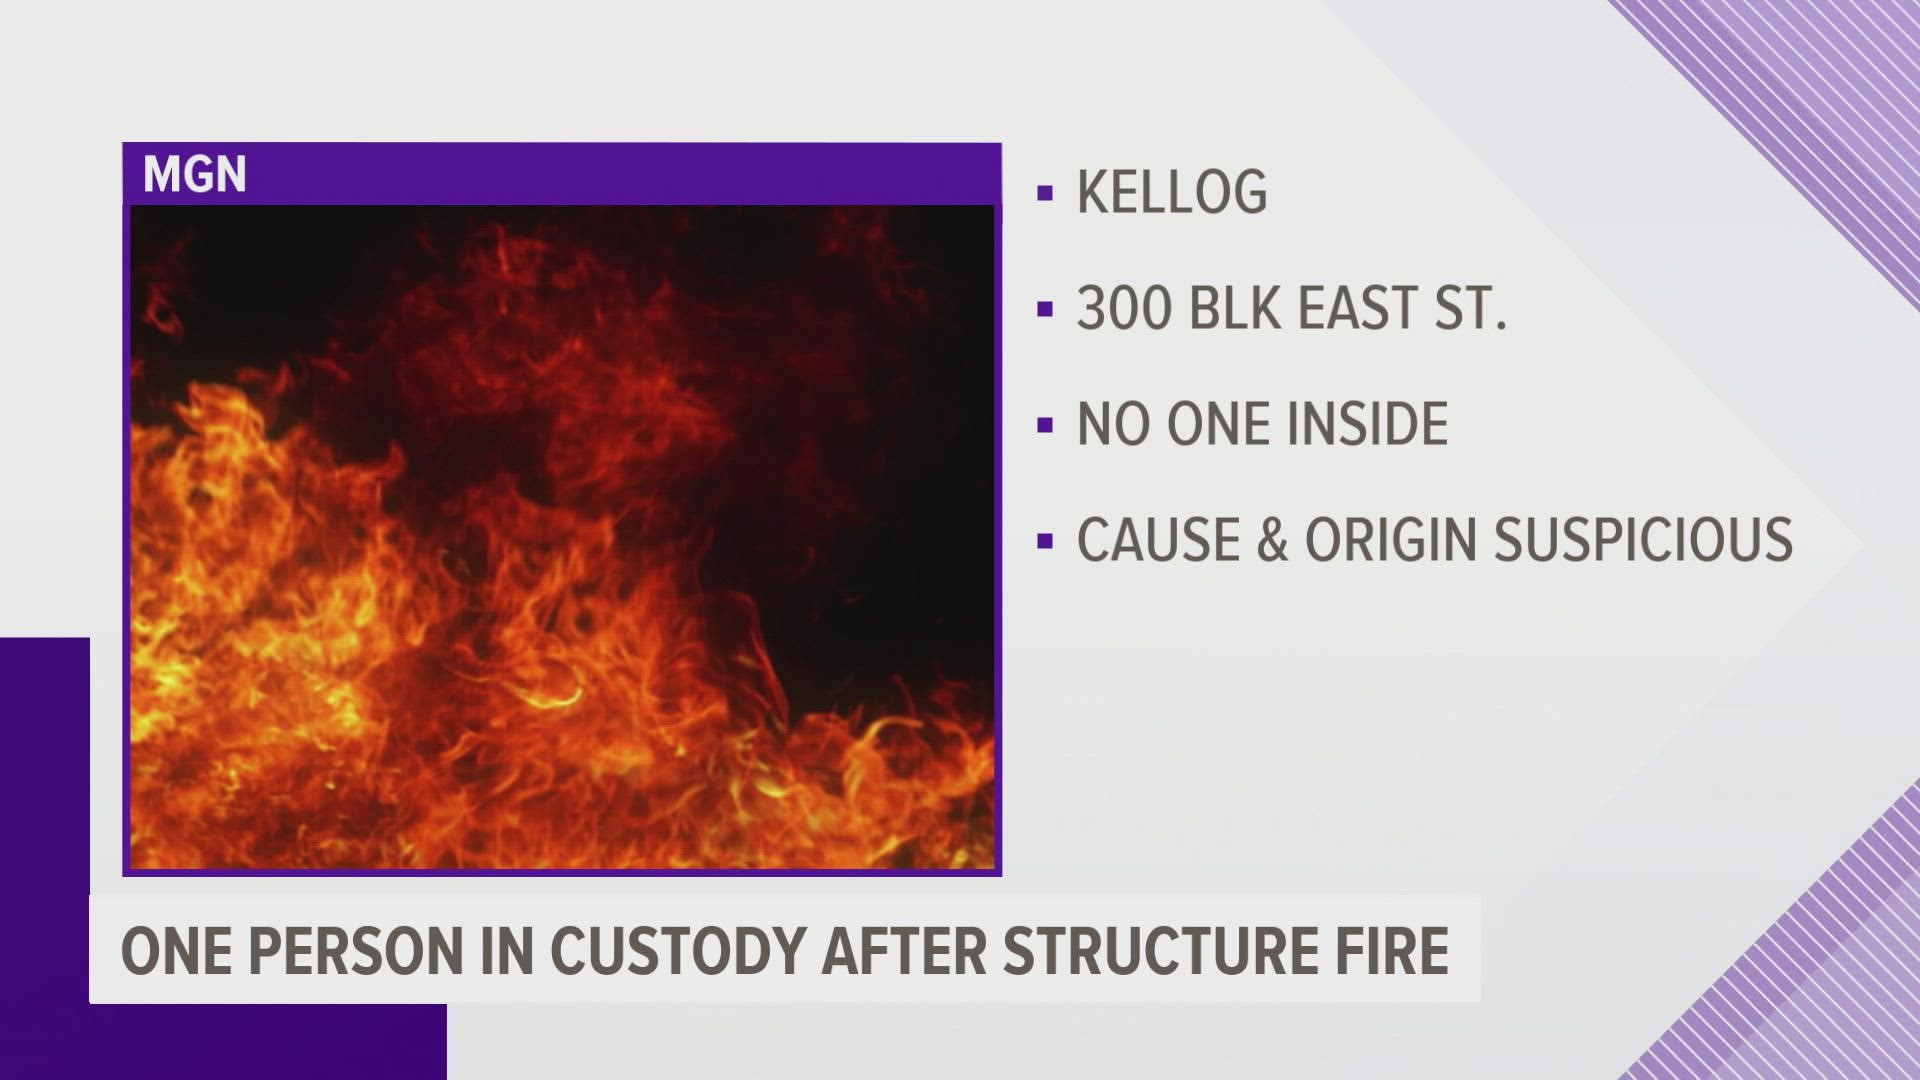 One person has been taken into custody following a fire at a Kellogg residence Wednesday.